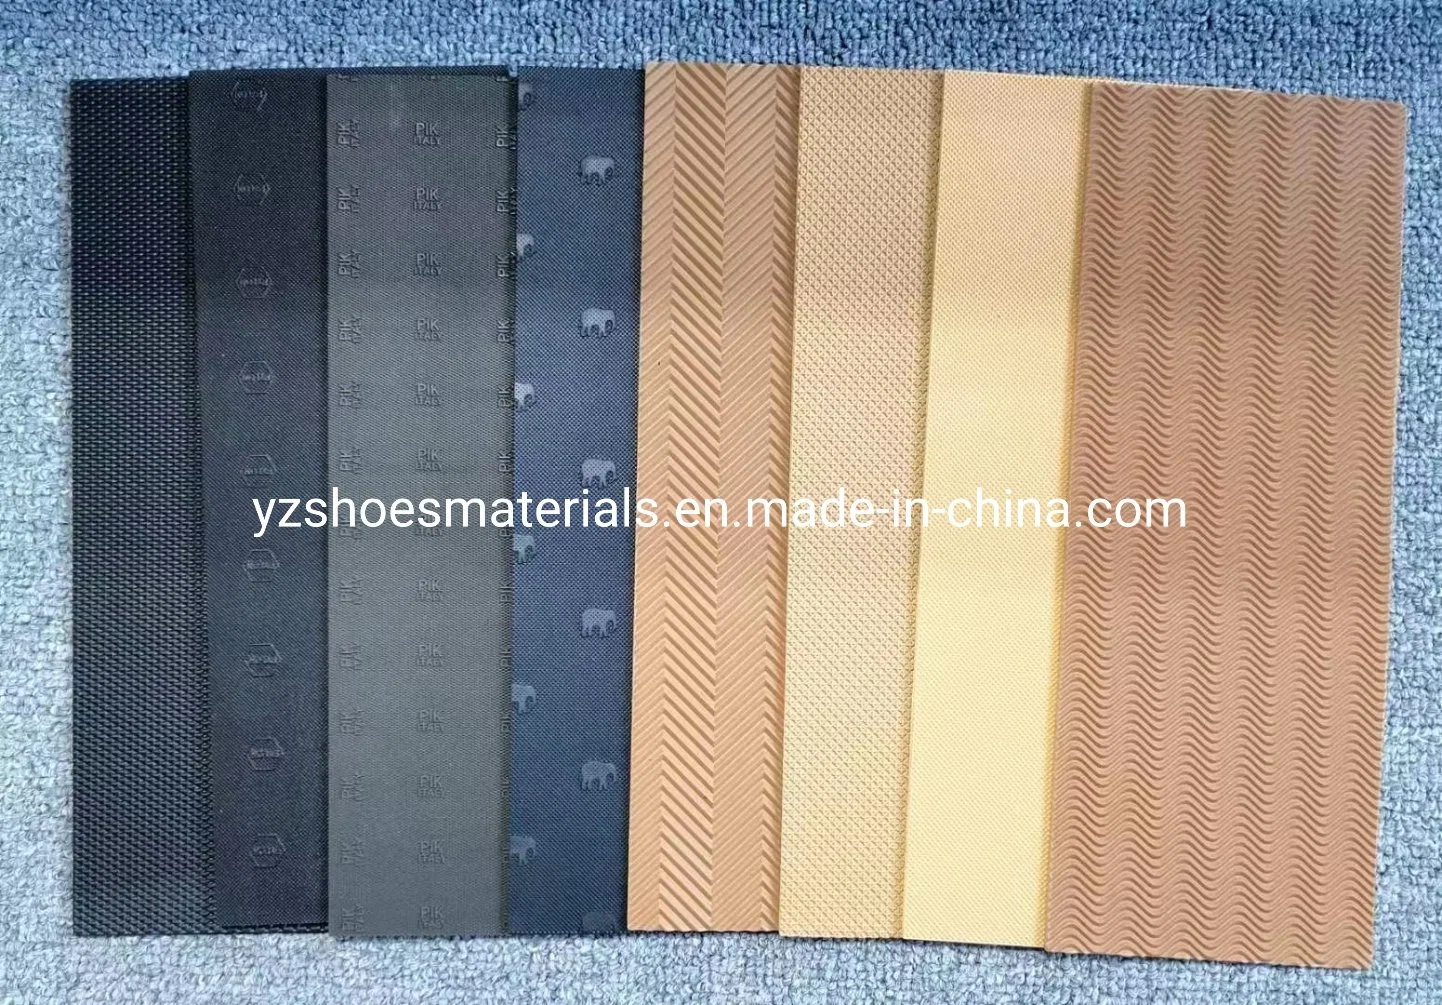 Different Design Rubber Sheeting Neolite Rubber Sole Sheet Silicone Products Rubber Products for Shoes Outsole Rubber Sole Sheet Shoe Sole Rubber Product Rubber